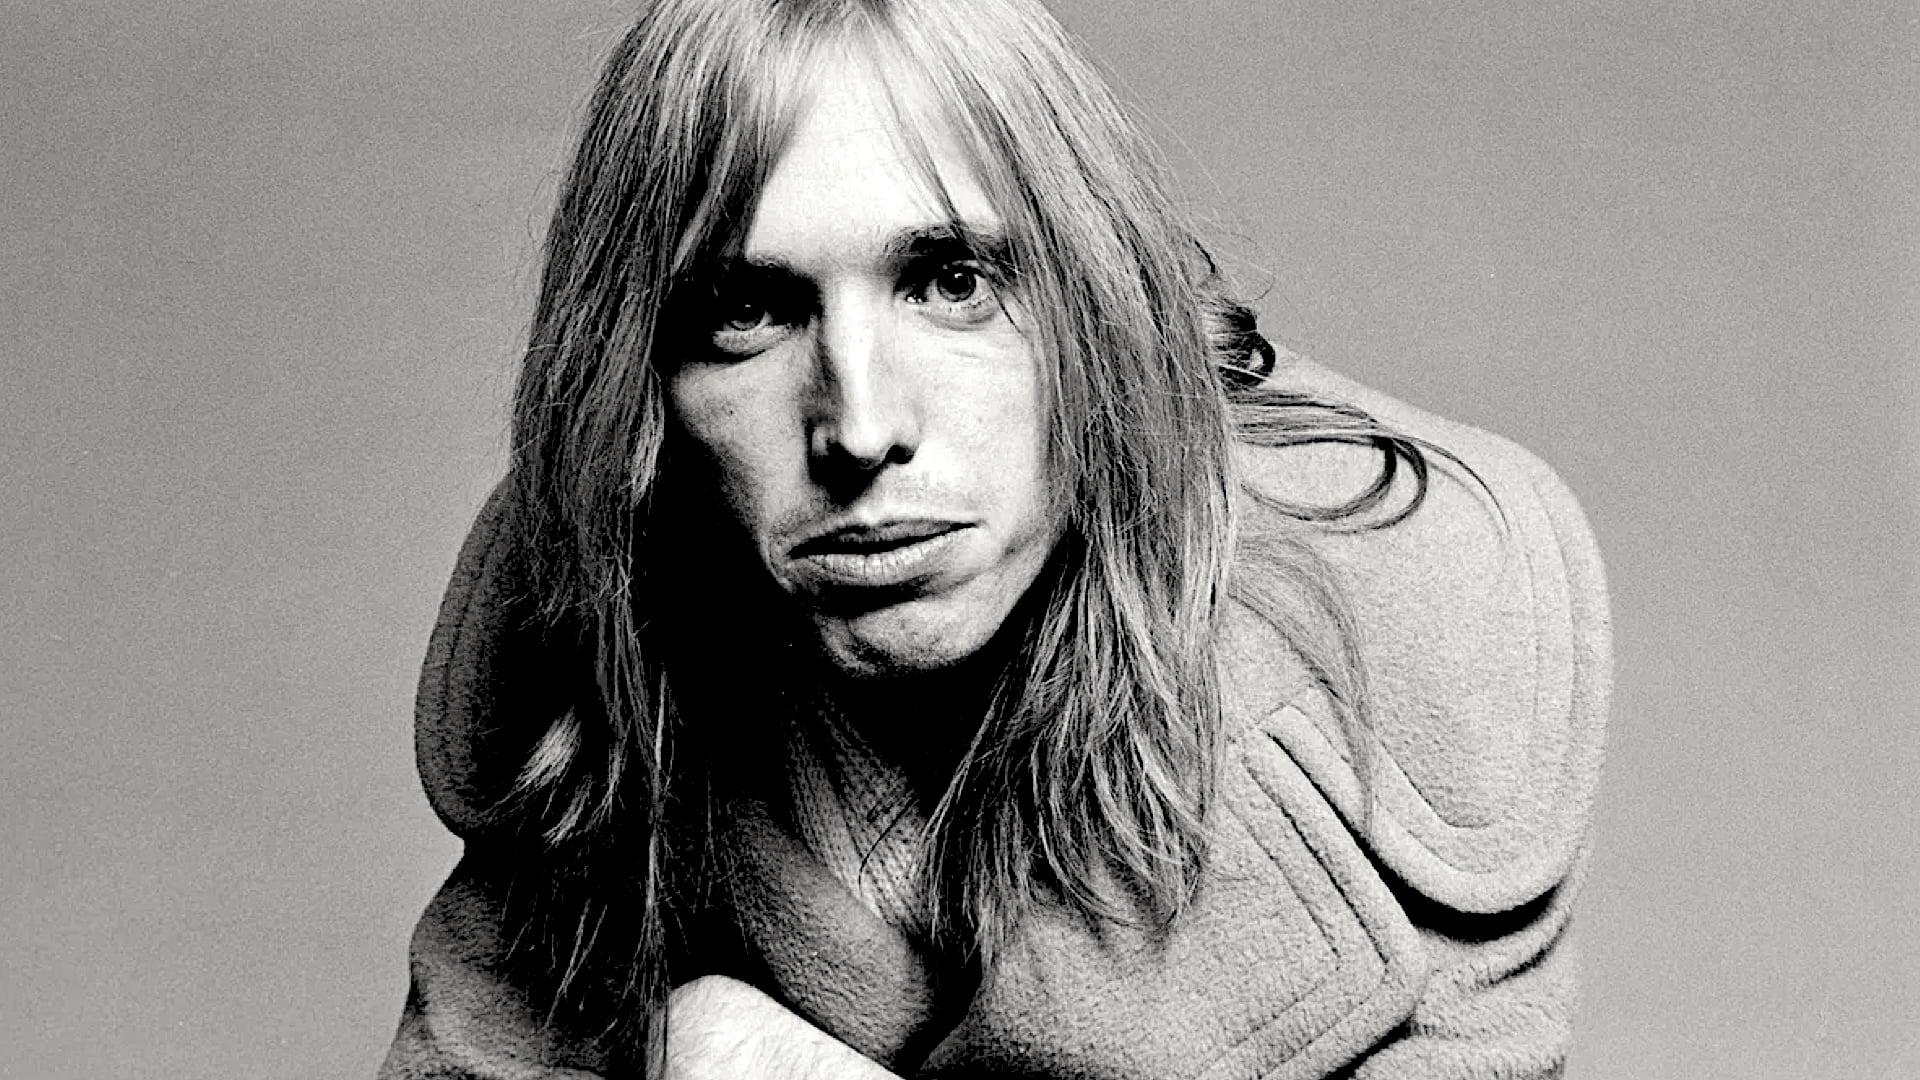 Tom Petty and the Heartbreakers: Runnin' Down a Dream backdrop